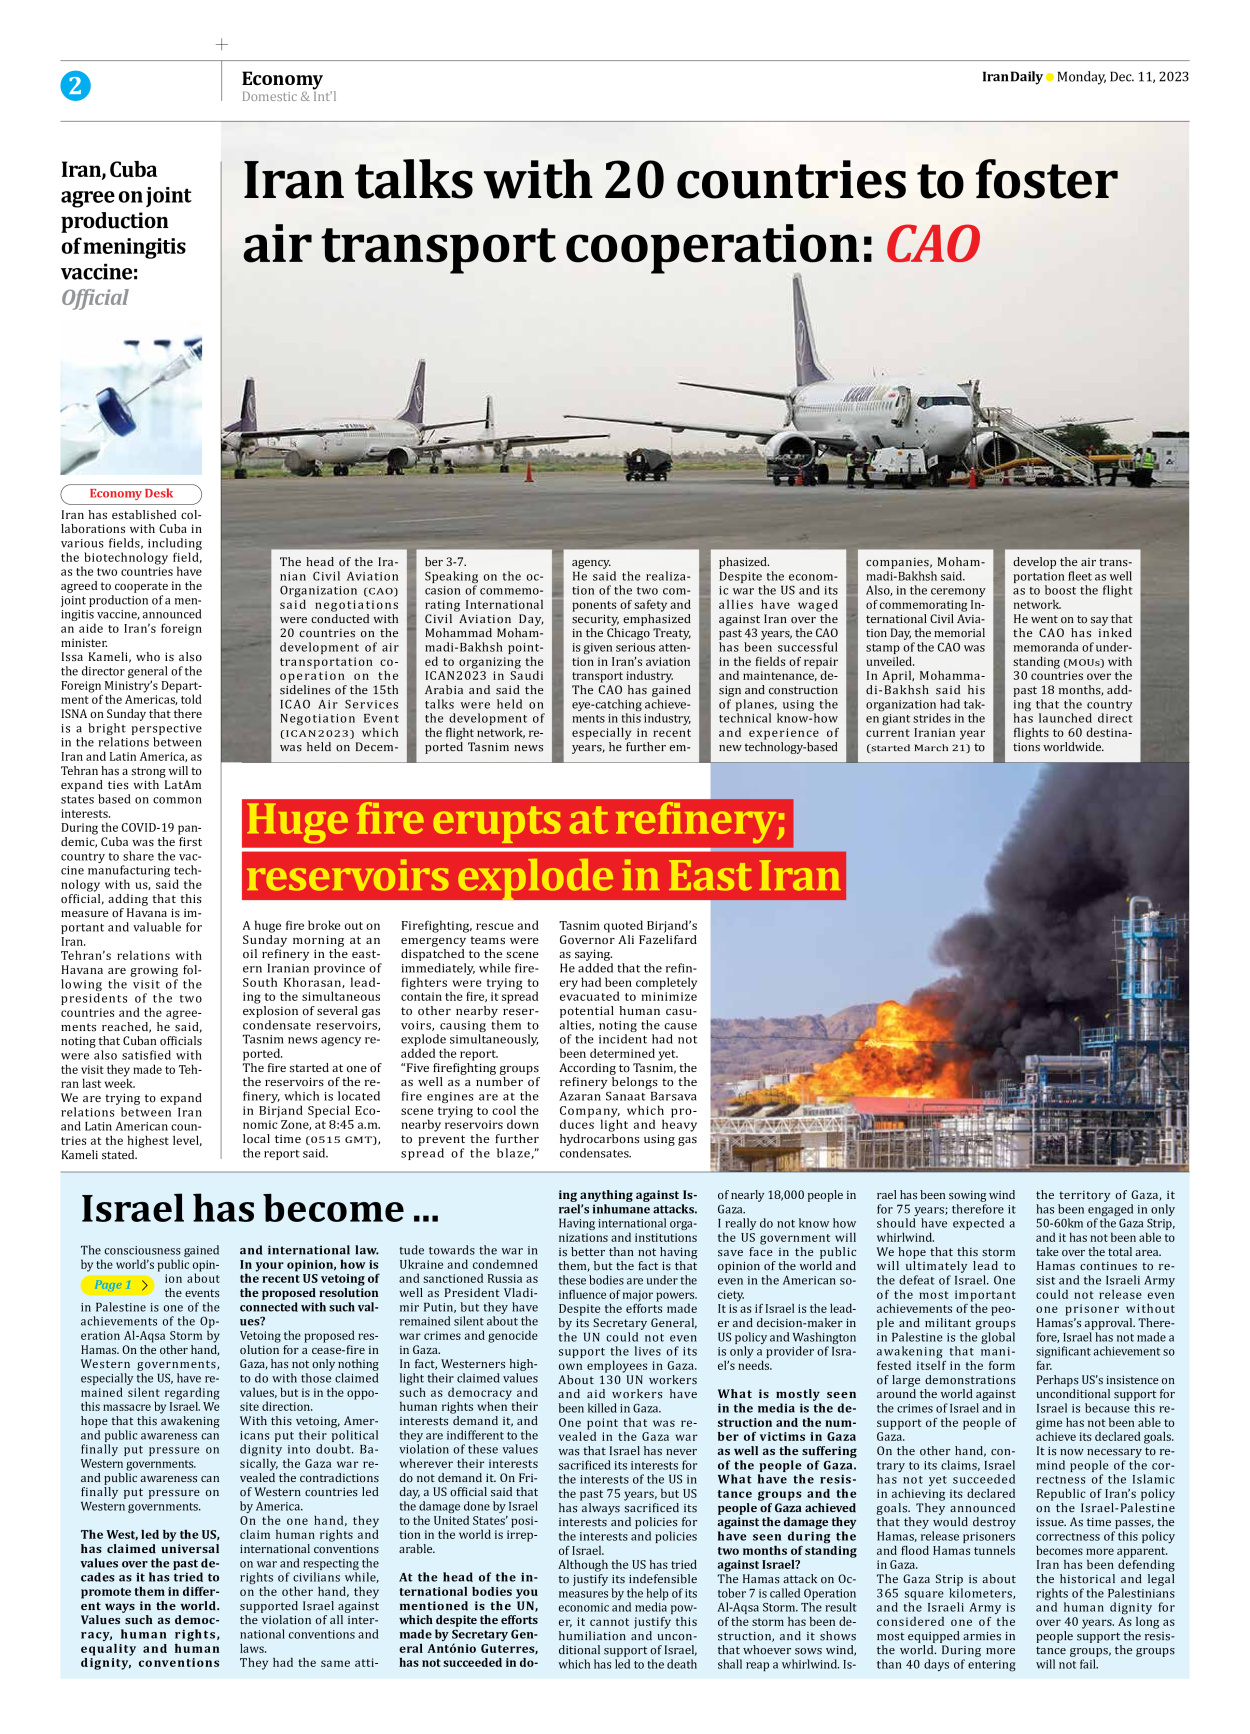 Iran Daily - Number Seven Thousand Four Hundred and Fifty Seven - 11 December 2023 - Page 2